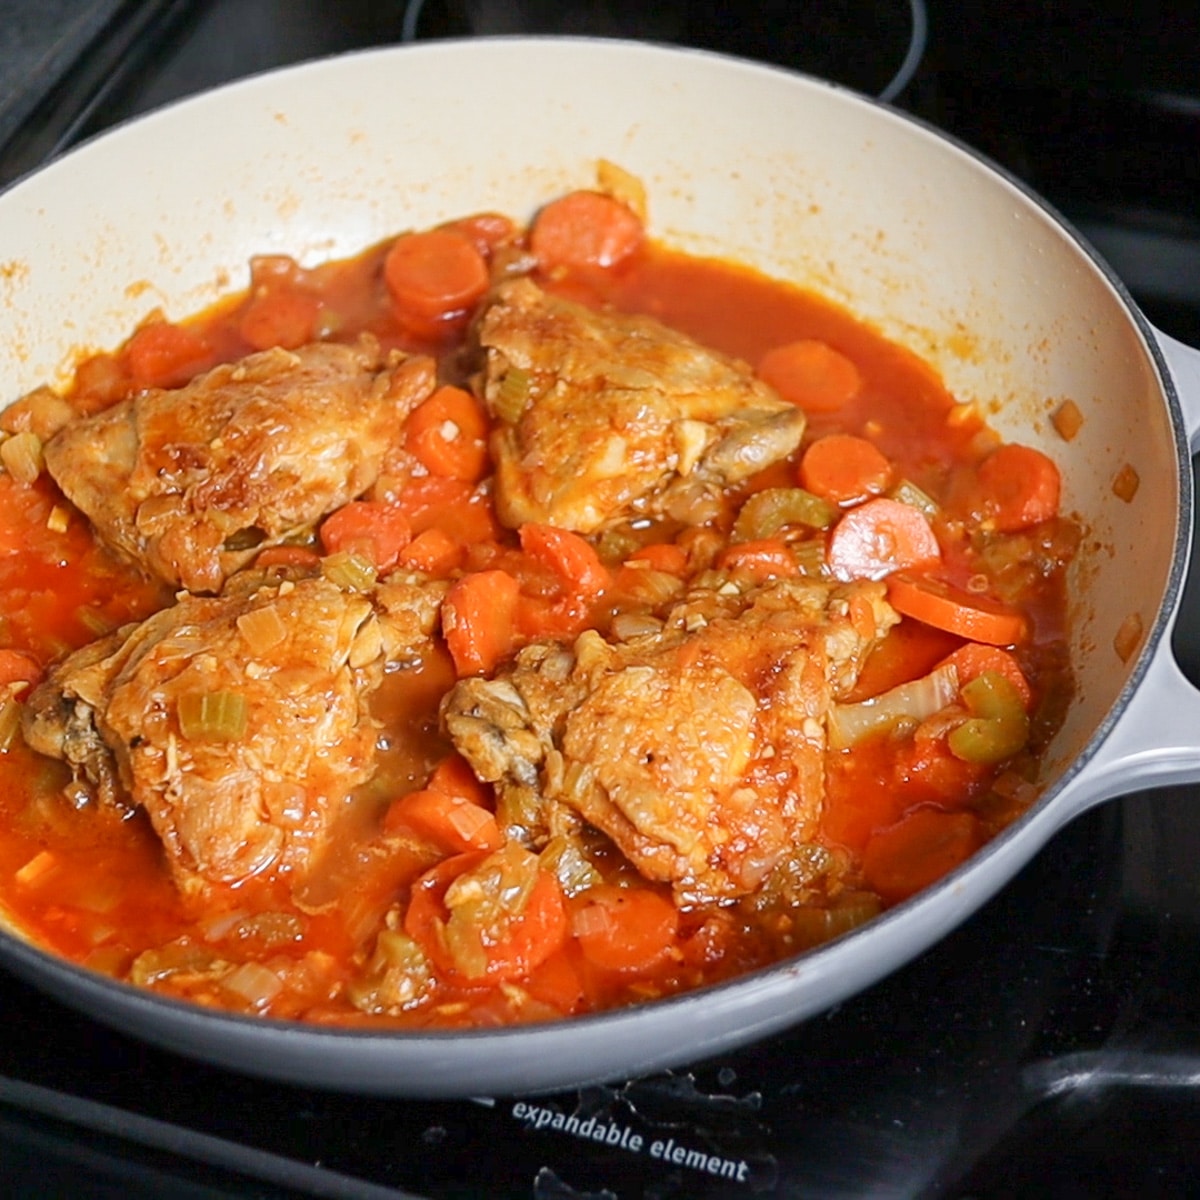 Braising chicken with carrots and celery